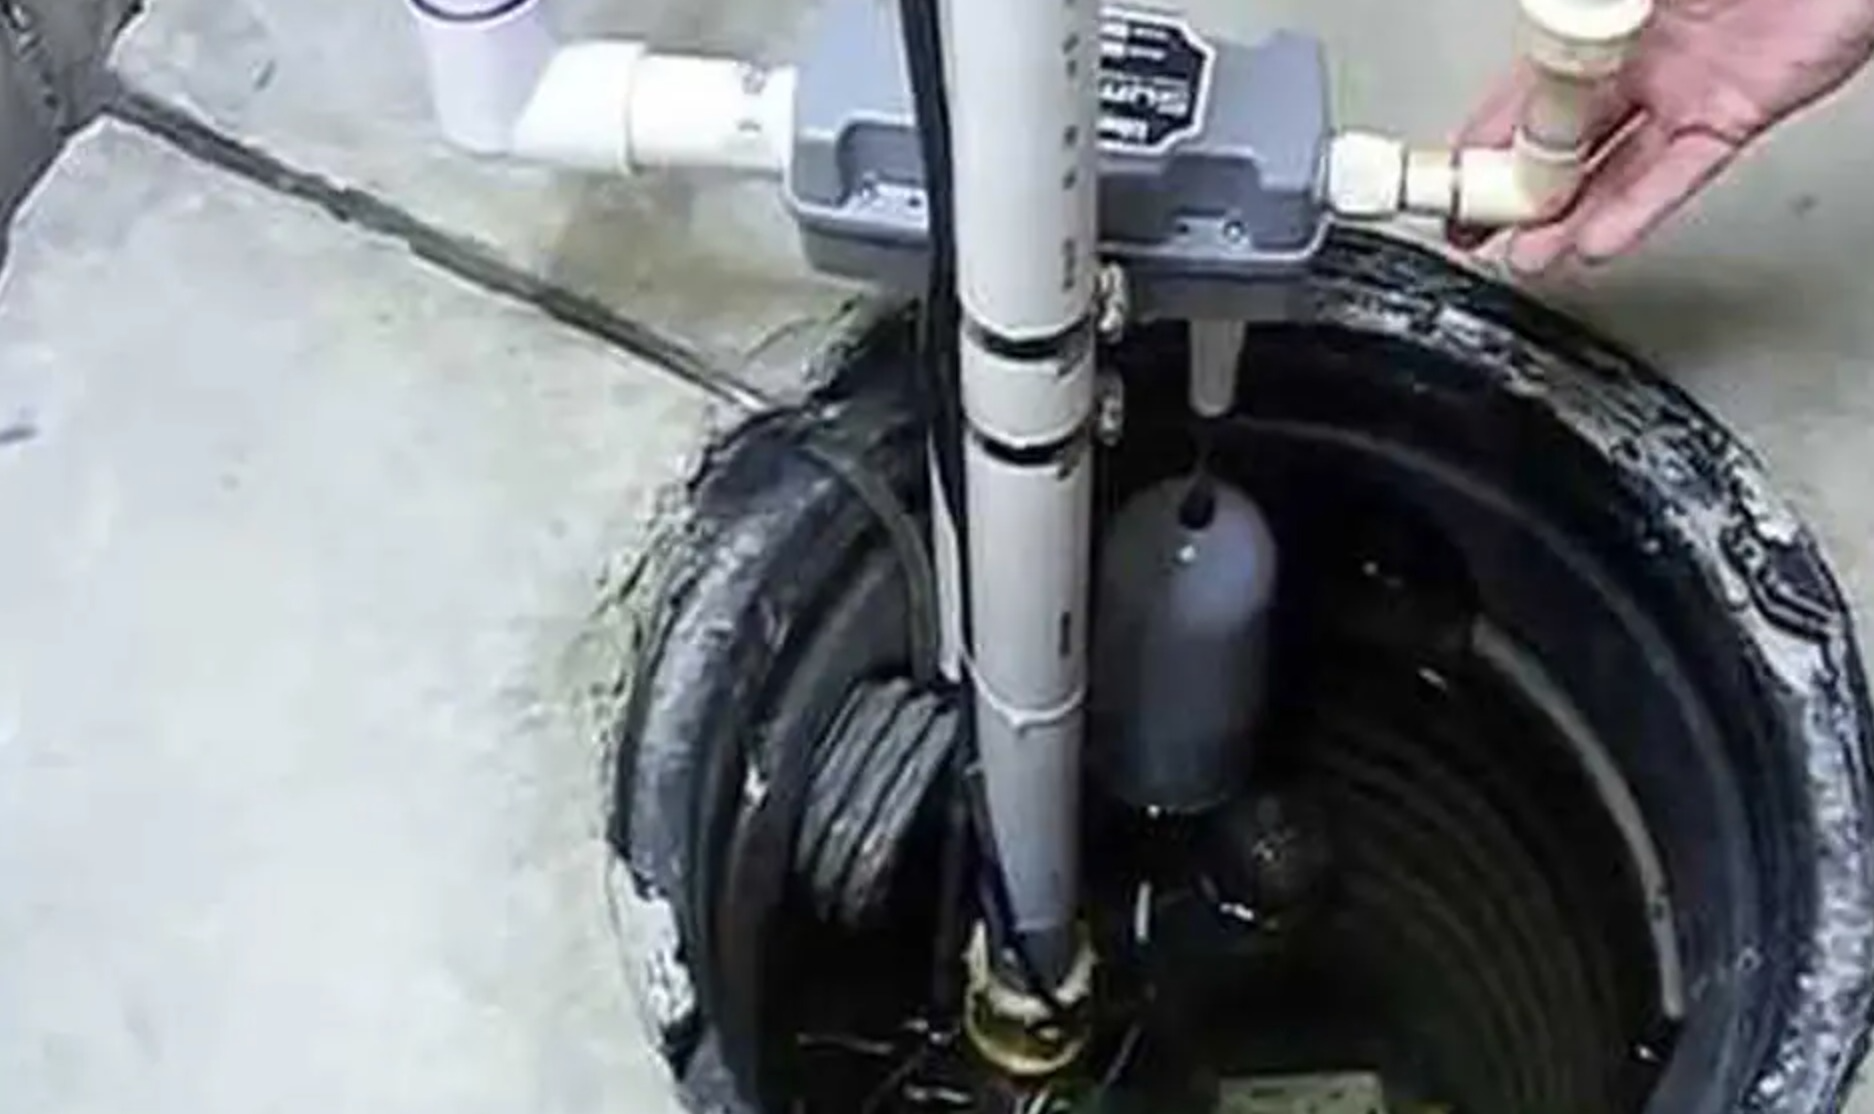 drain cleaning hot water pumping